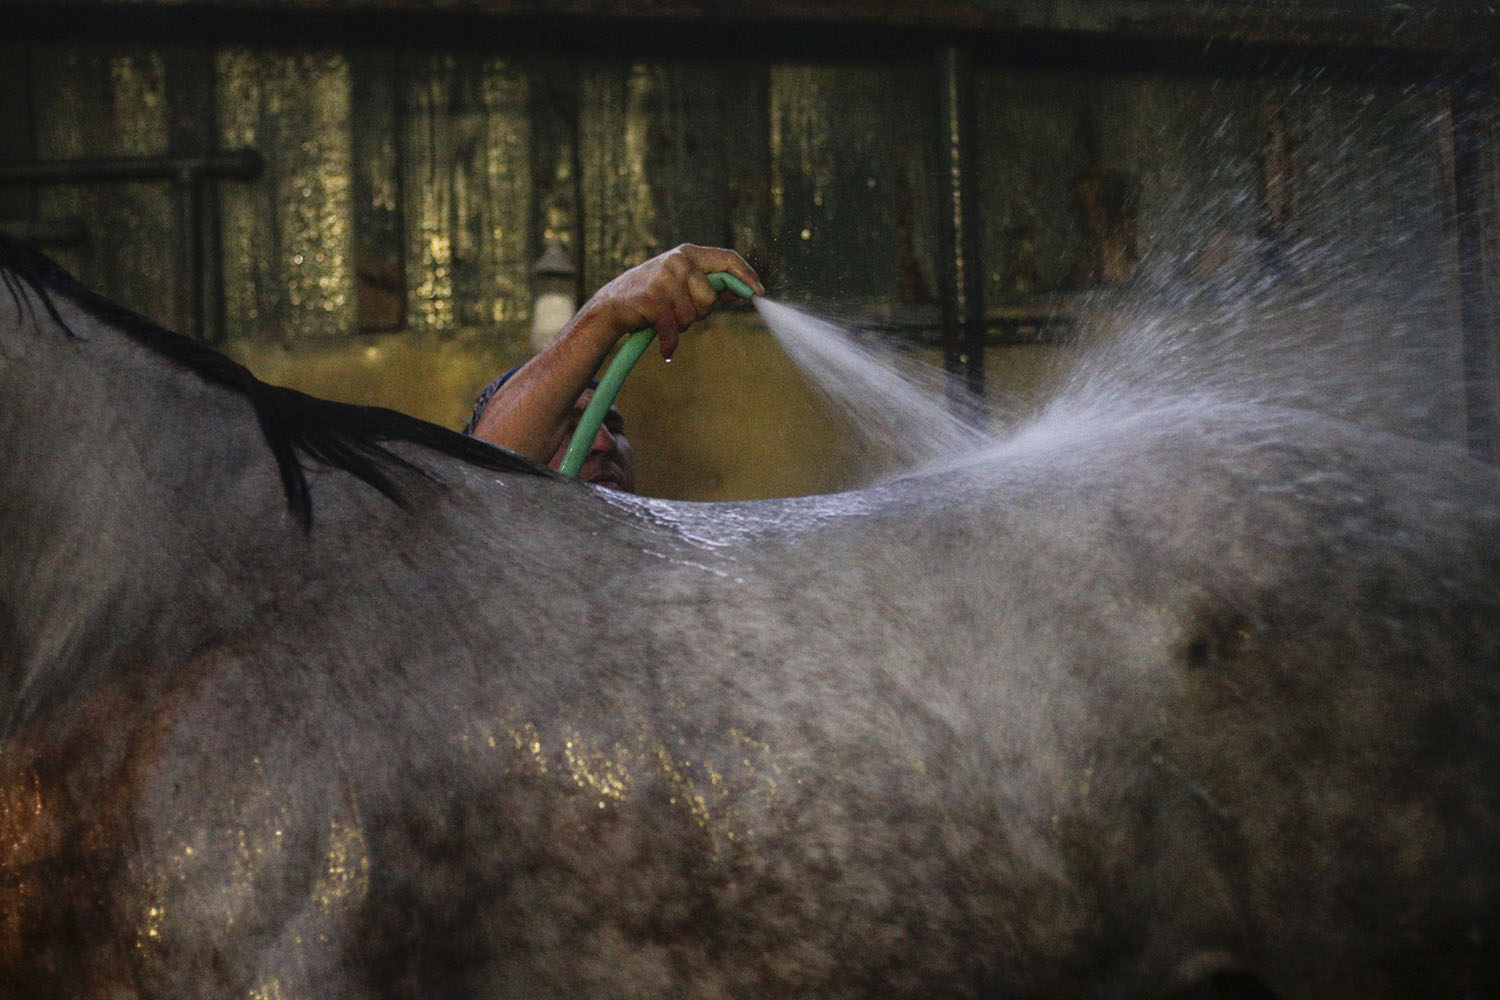 Oct. 28, 2013. A worker bathes a horse after a training session for Saturday's Breeders' Cup at Santa Anita Park, in Arcadia, Calif.